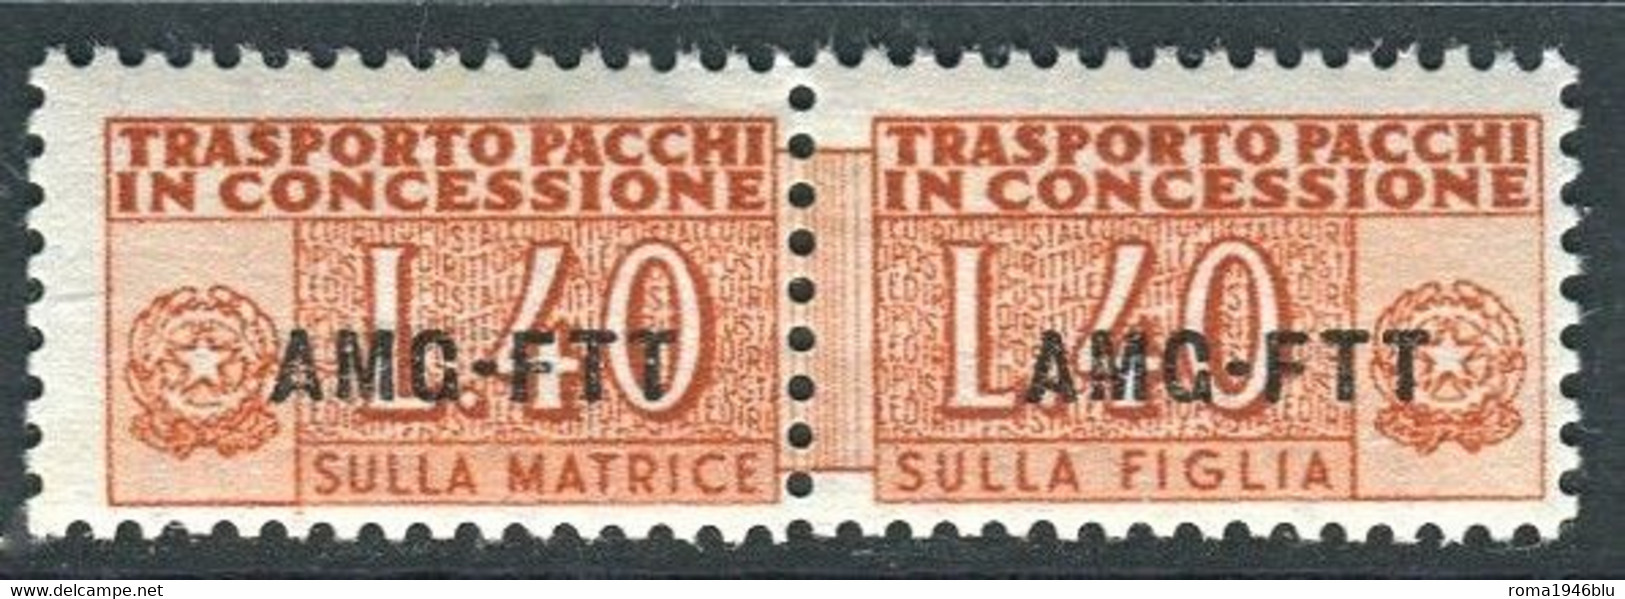 TRIESTE 1953 PACCHI CONCESSIONE 40 L. ** MNH - Mint/hinged